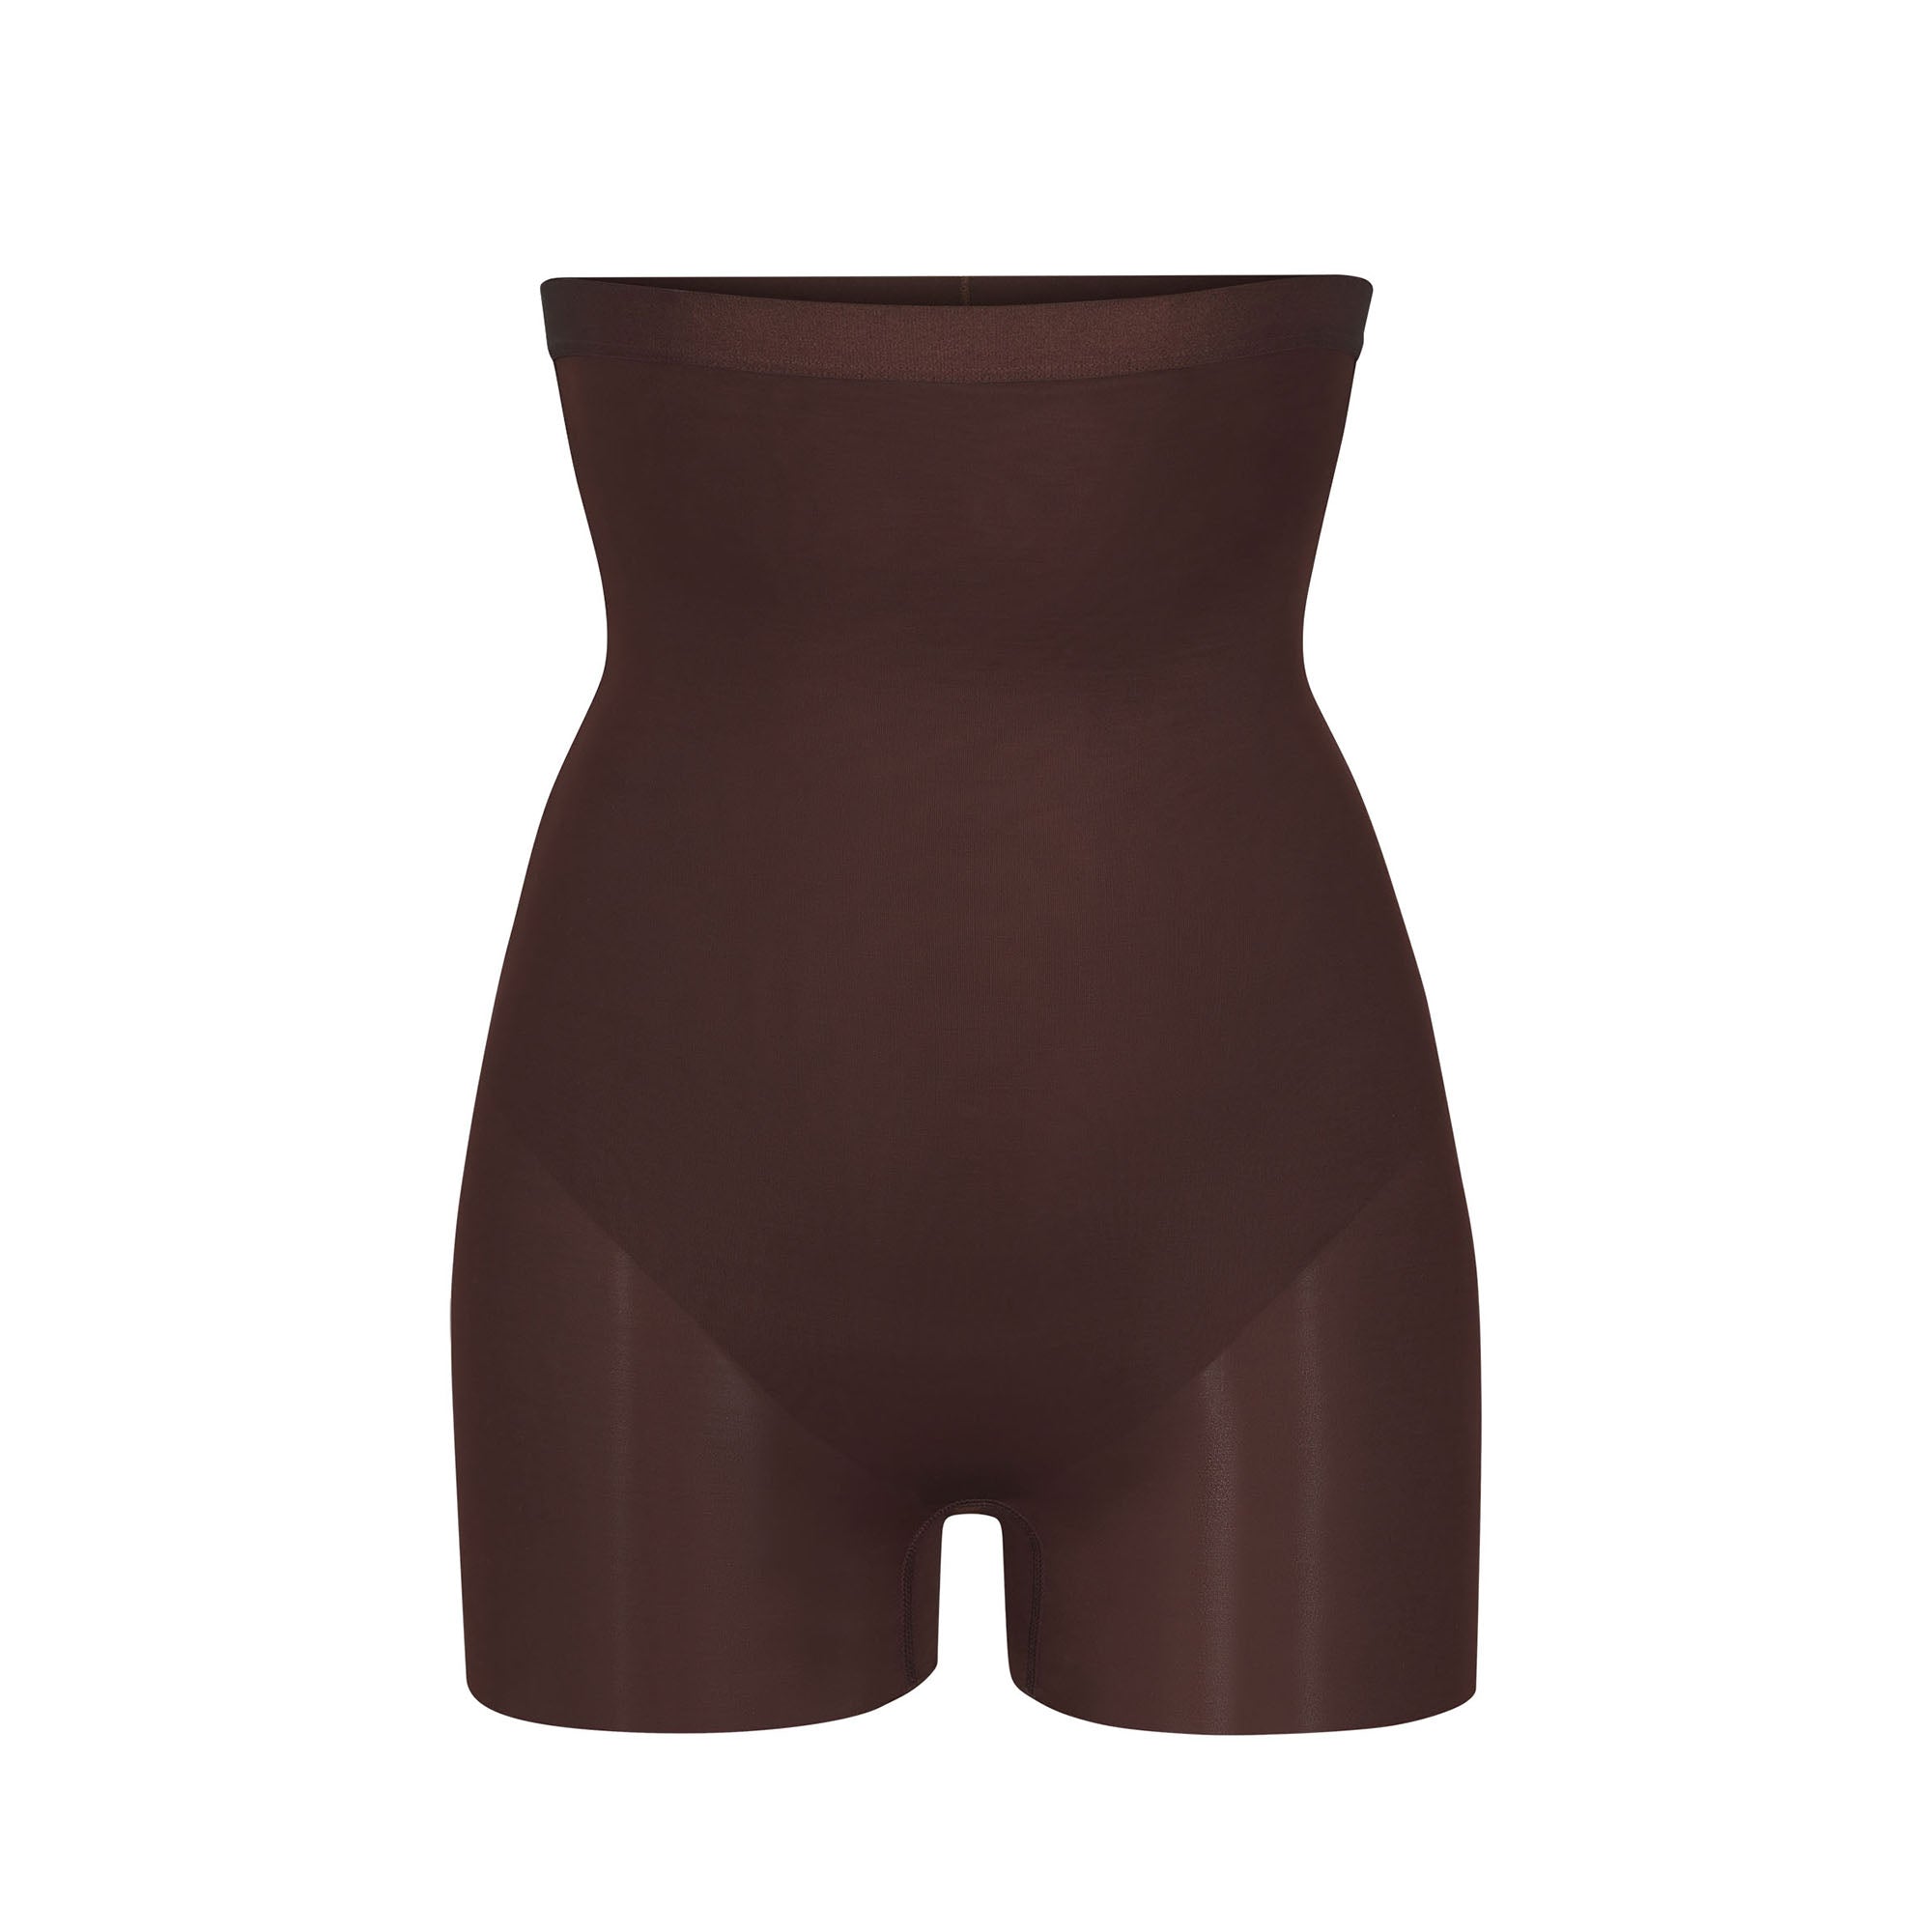 BARELY THERE HIGH-WAISTED SHORTIE | COCOA